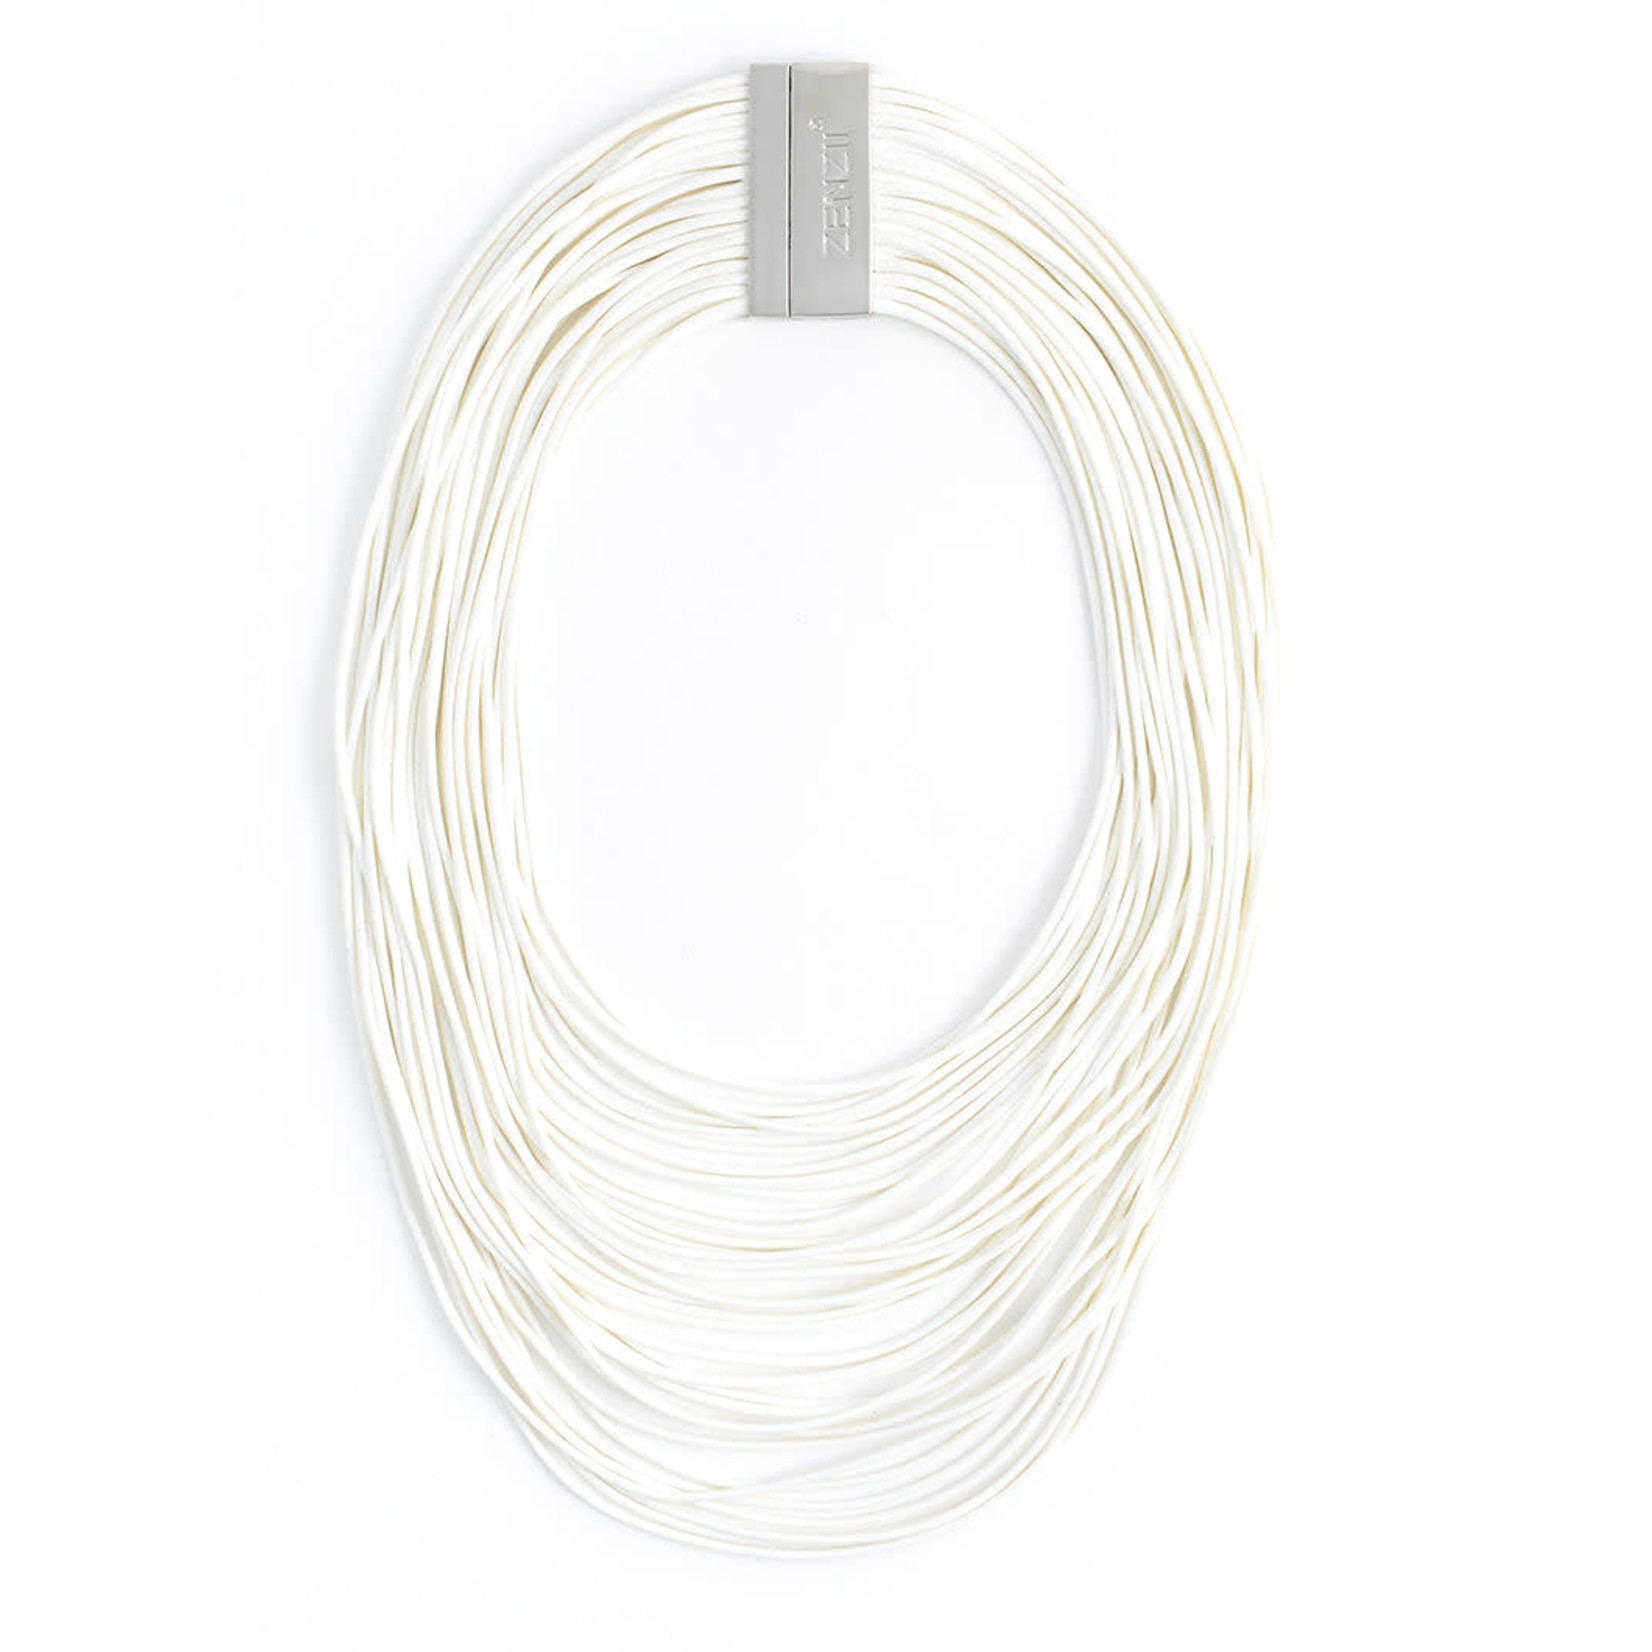 Zenzii Layered Rope Necklace in White